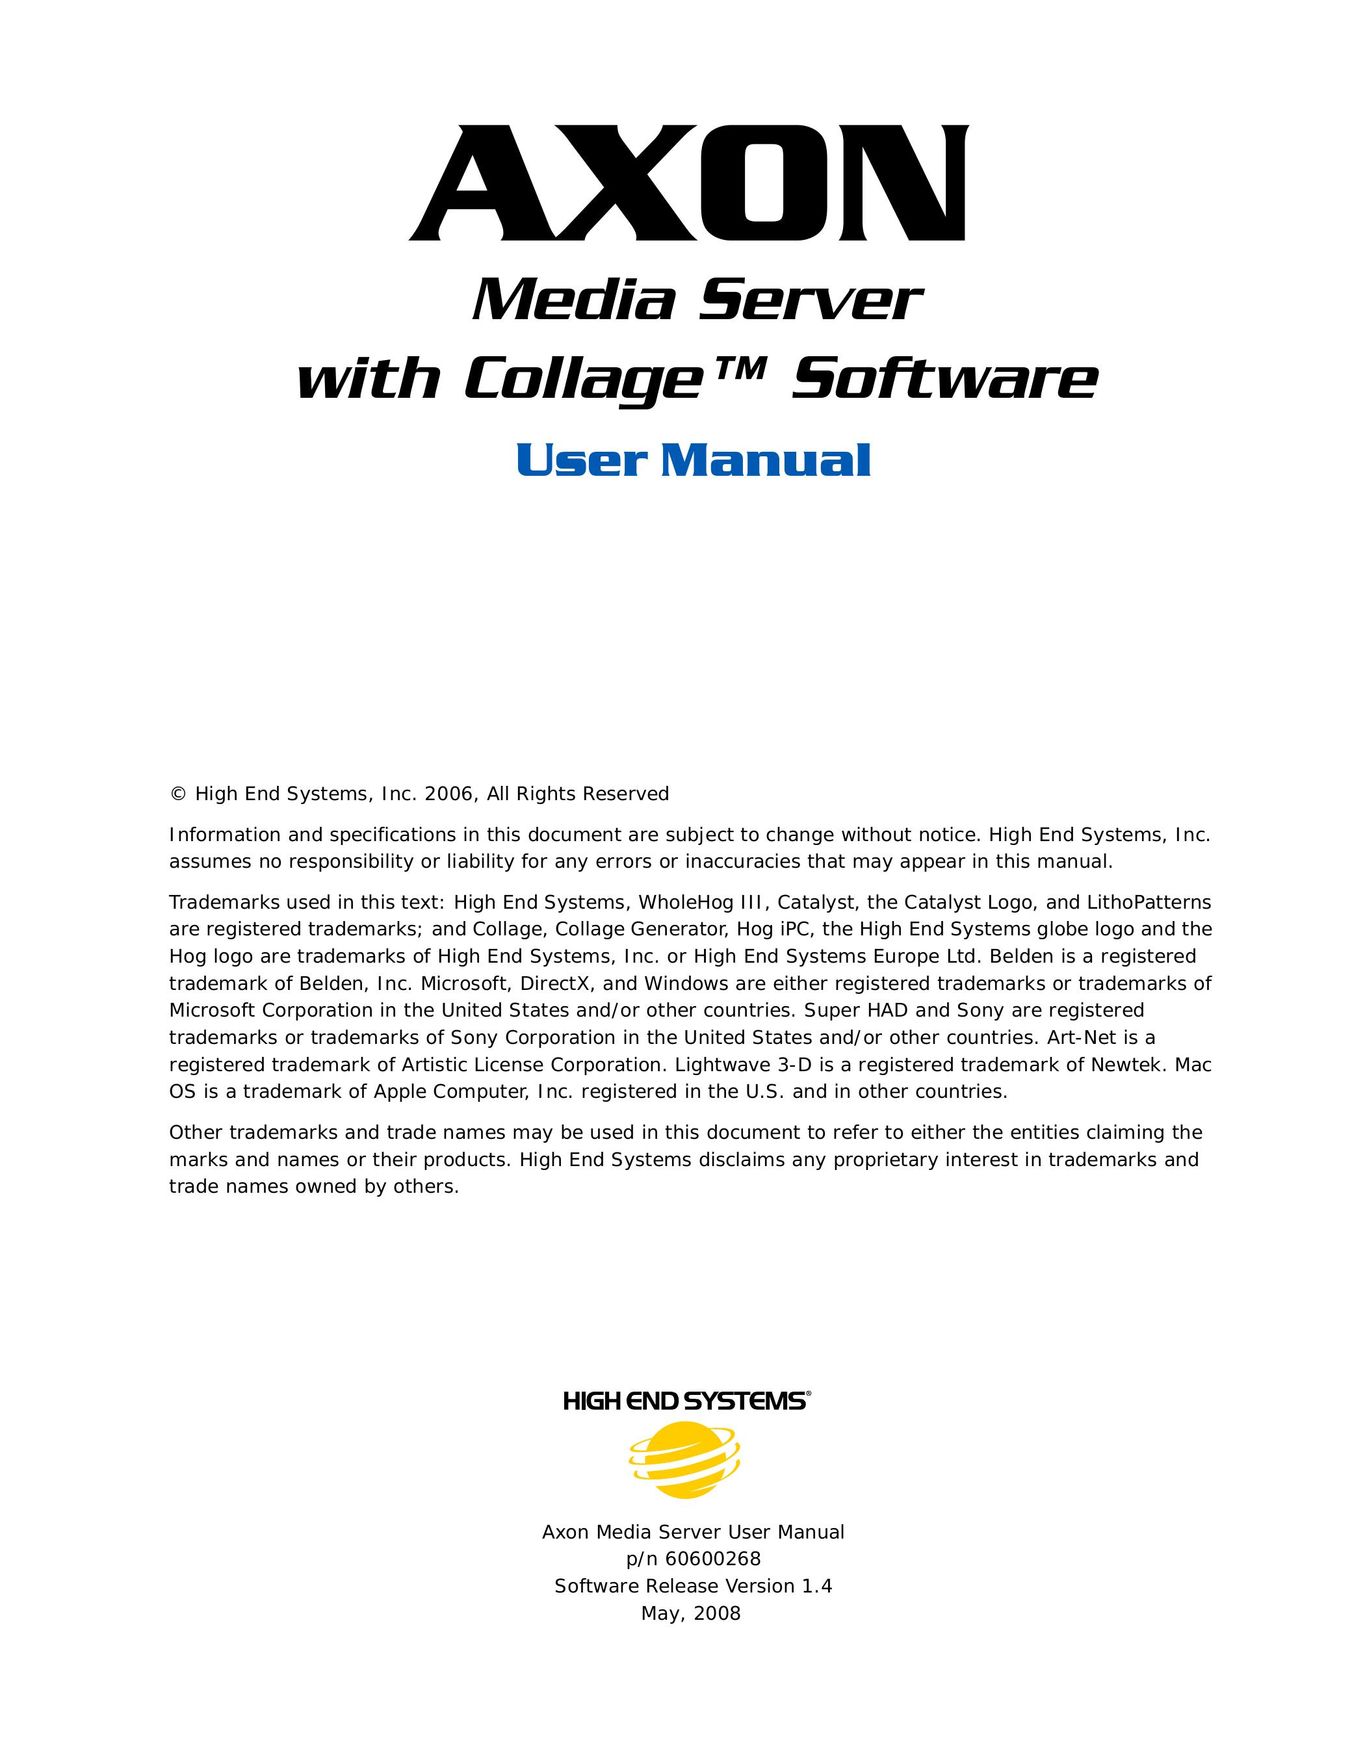 High End Systems AXON Server User Manual